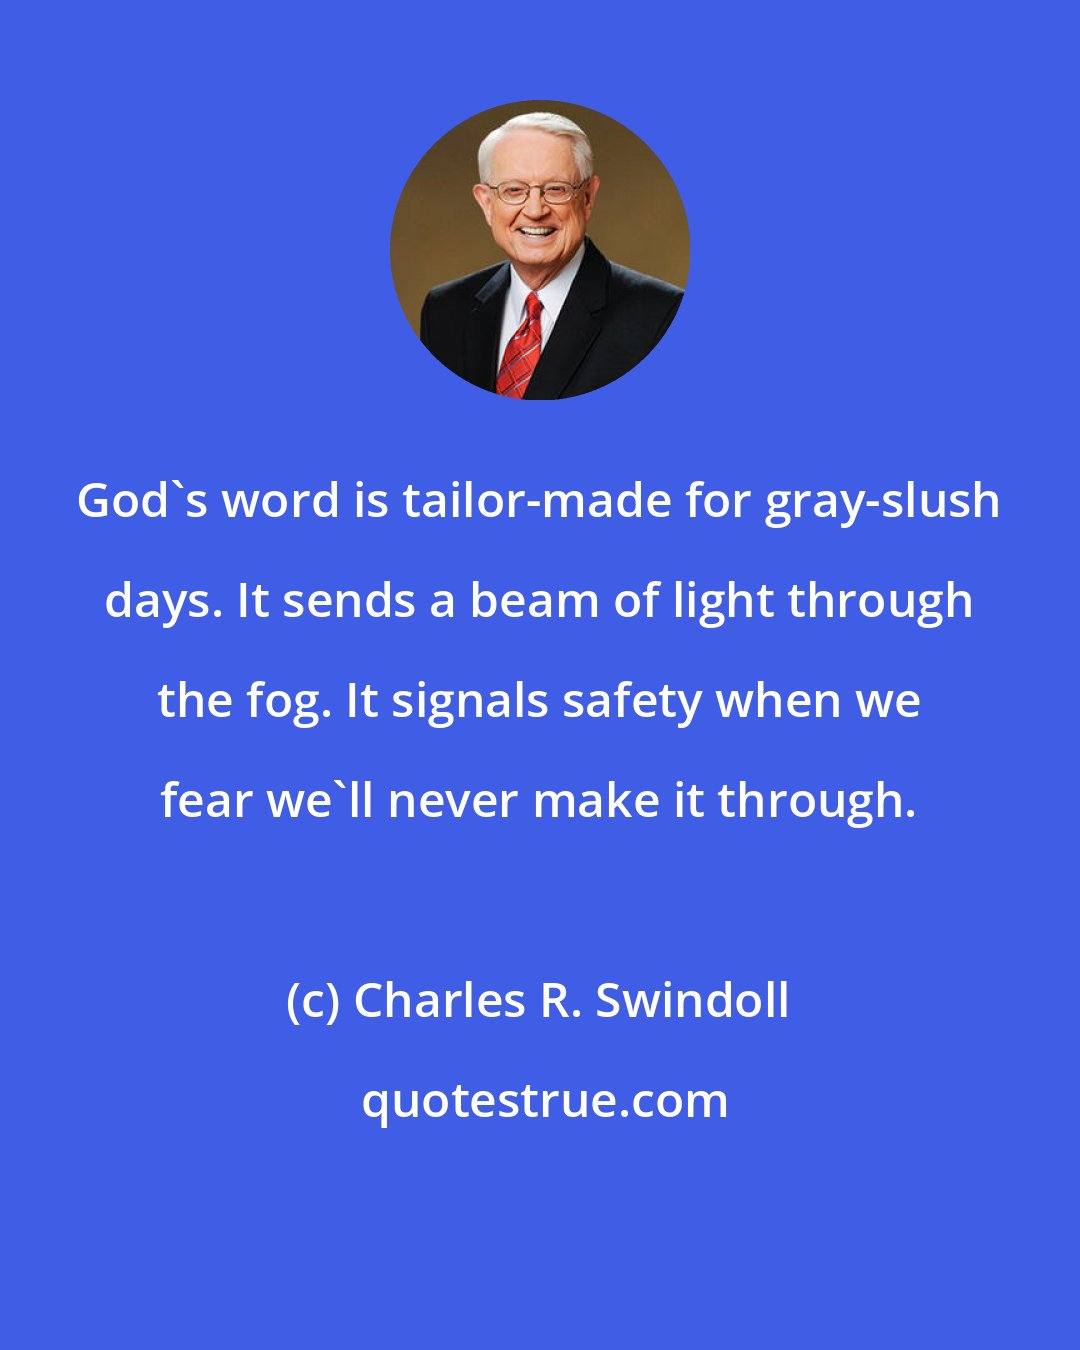 Charles R. Swindoll: God's word is tailor-made for gray-slush days. It sends a beam of light through the fog. It signals safety when we fear we'll never make it through.